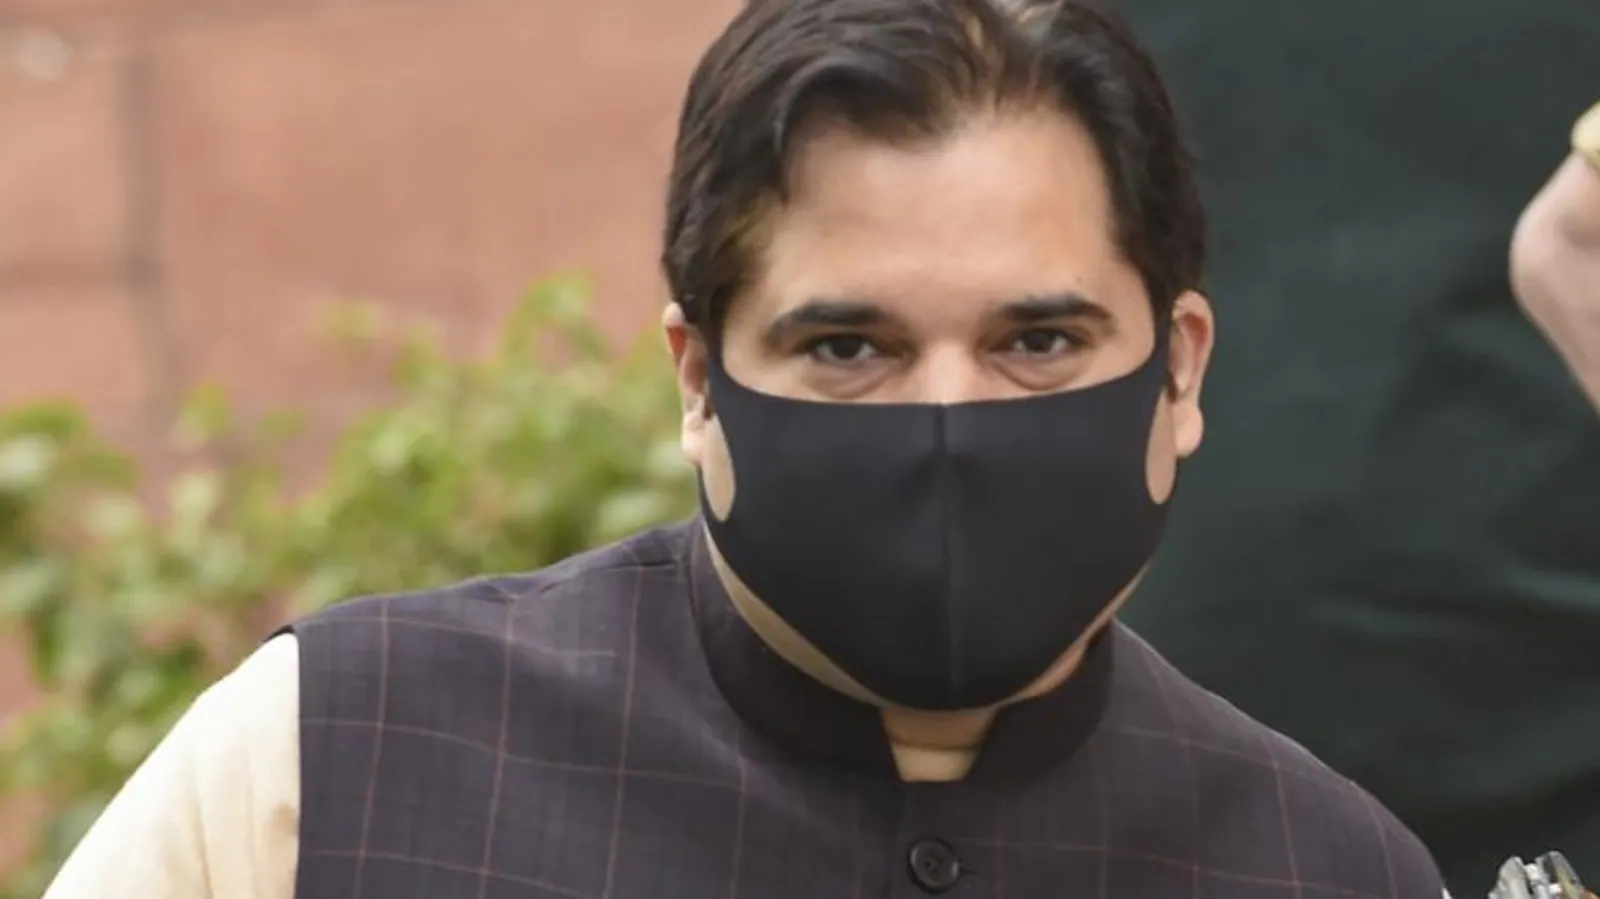 BJP MP Varun Gandhi on what should be done for students returning from Ukraine